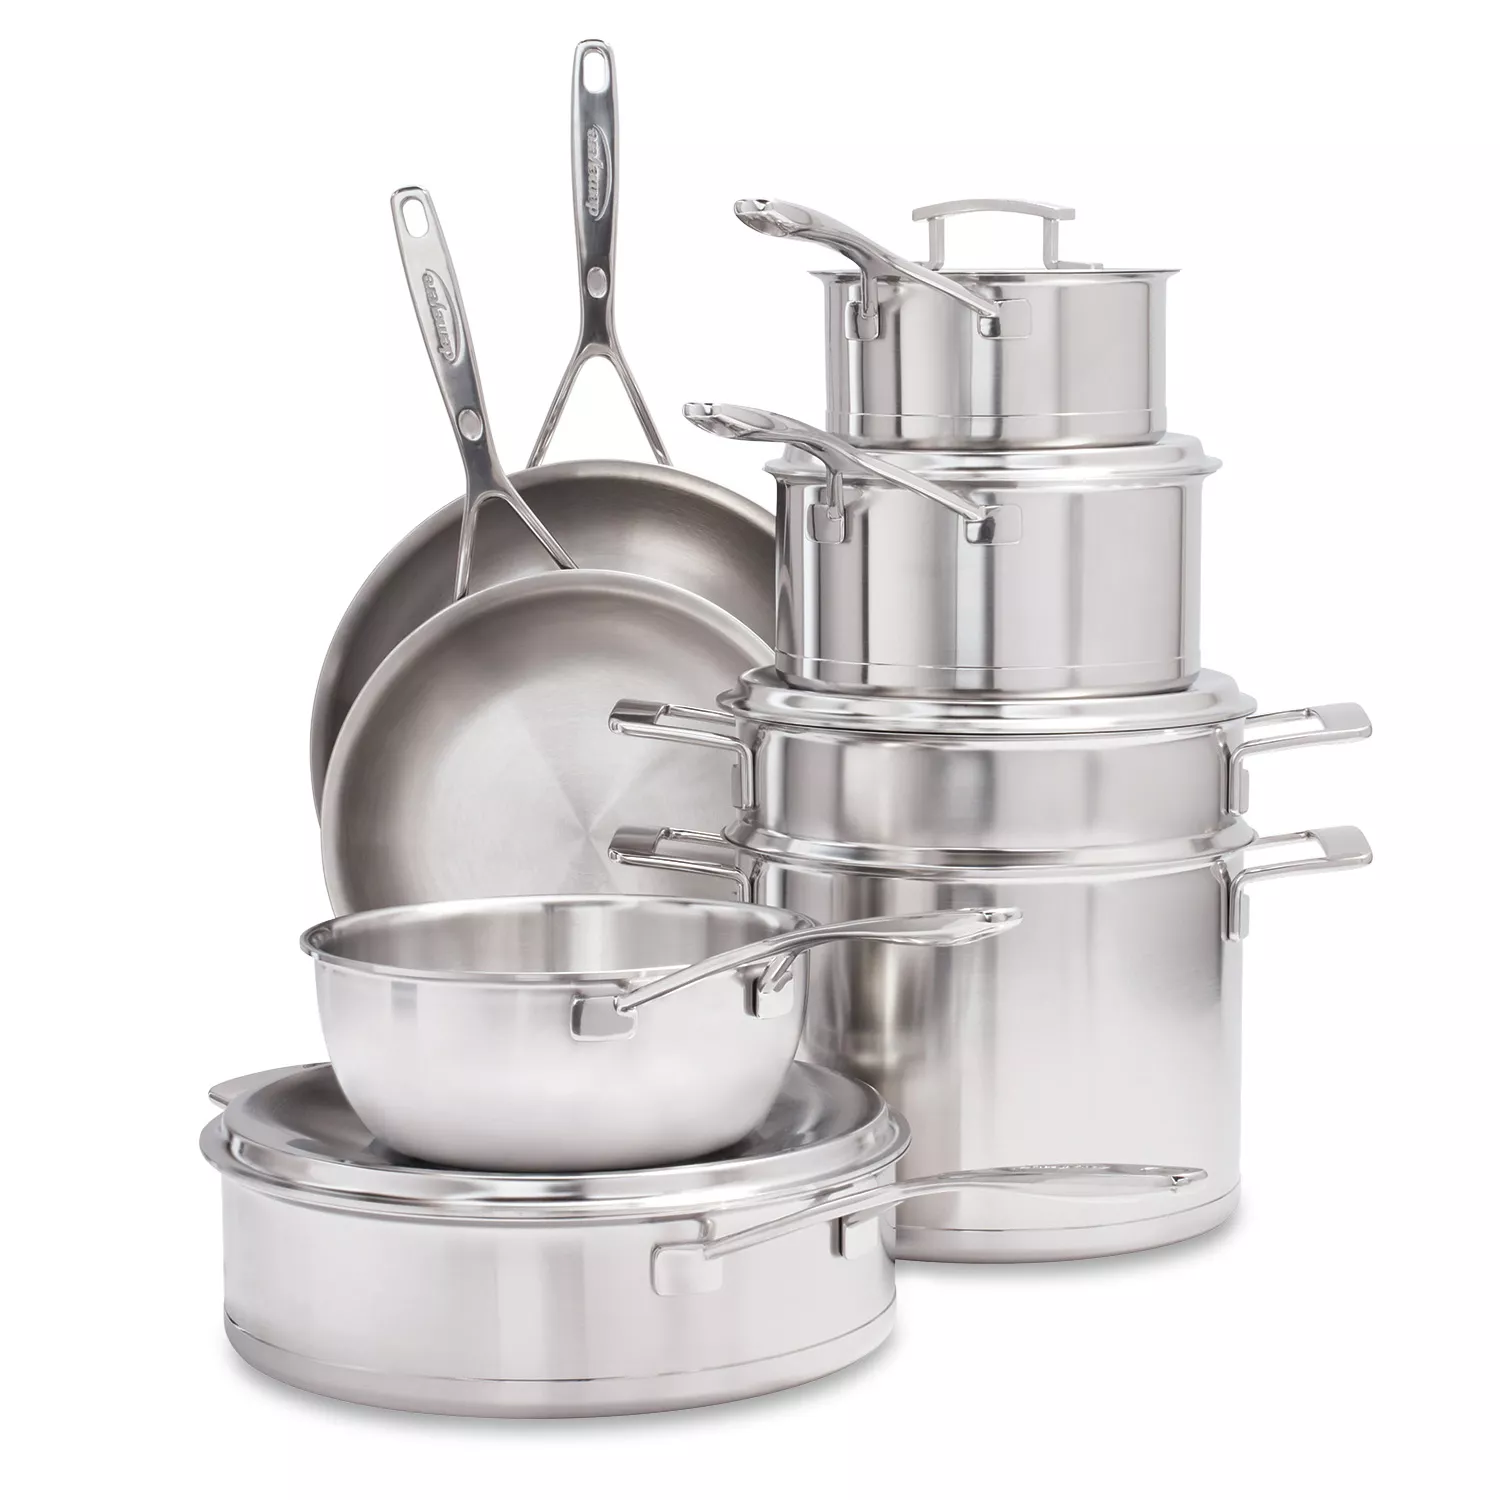 Cook N Home 12-Piece Stainless Steel Cookware Set - Silver